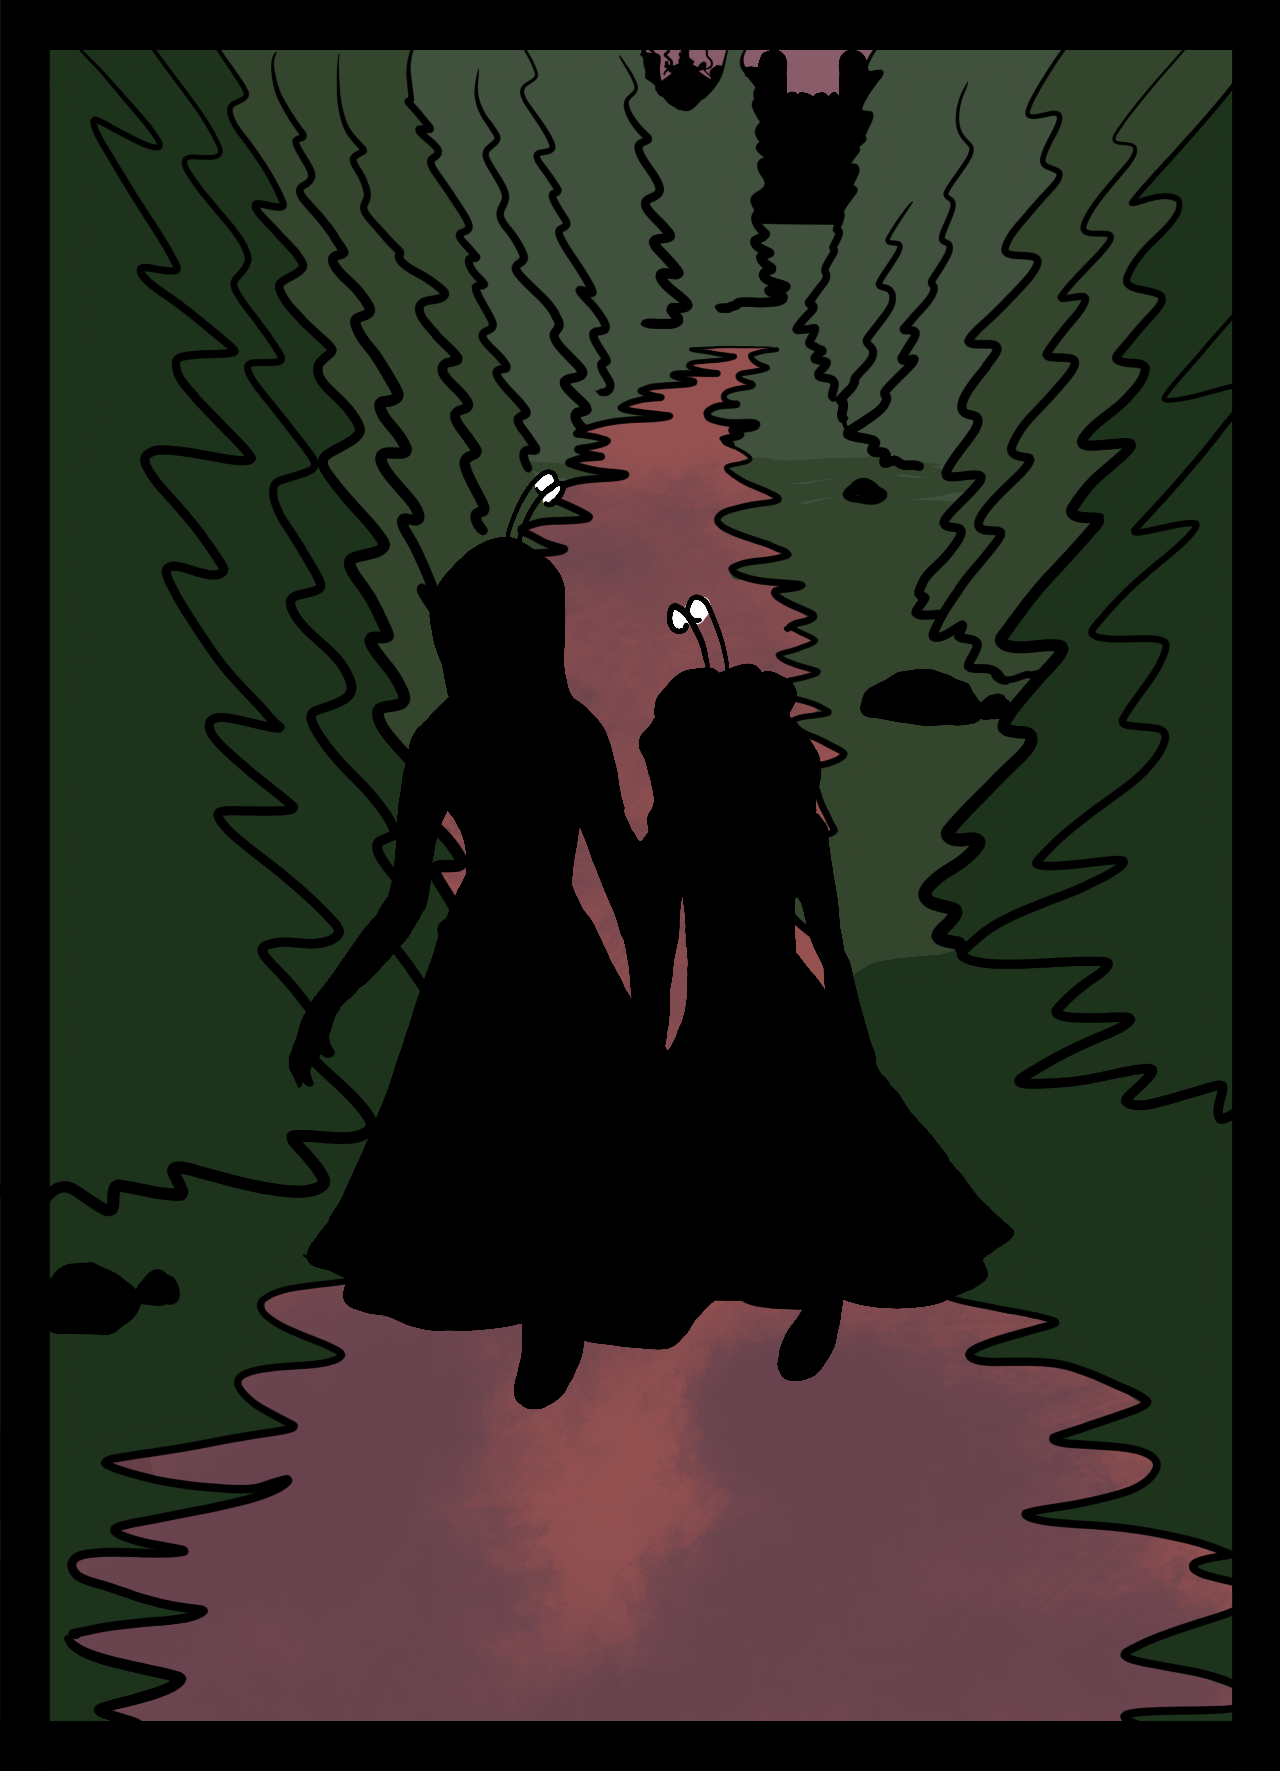 Page 44: A young woman, holds her little sister’s hand as they walk on a path in the woods. Both girls have insect-like antennae coming out of their heads. They also have long dresses.